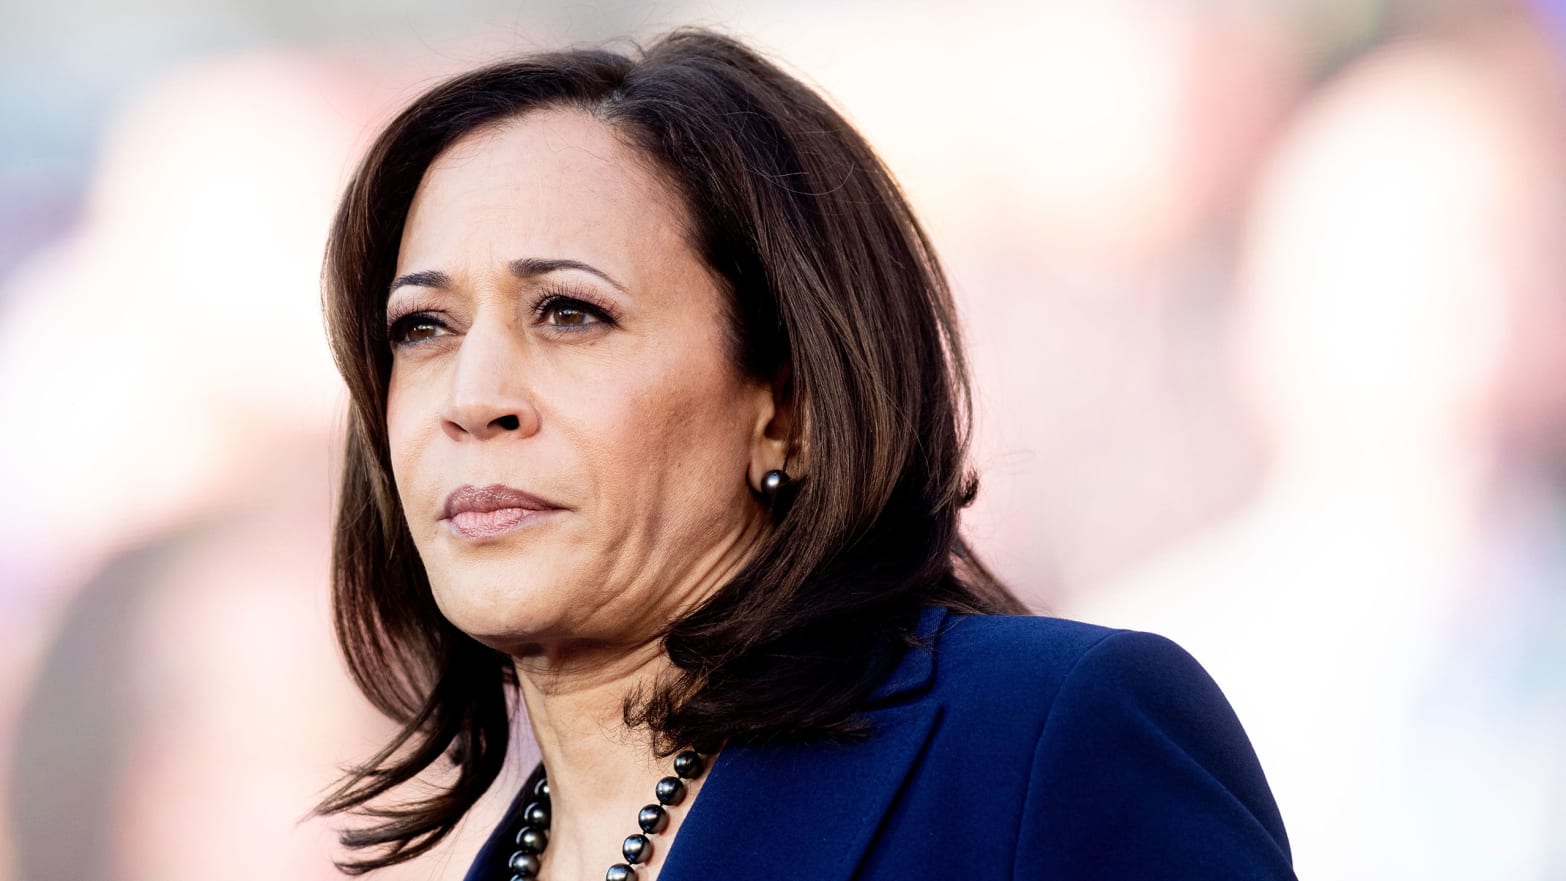 Willie Brown says this is why Kamala Harris should decline VP role